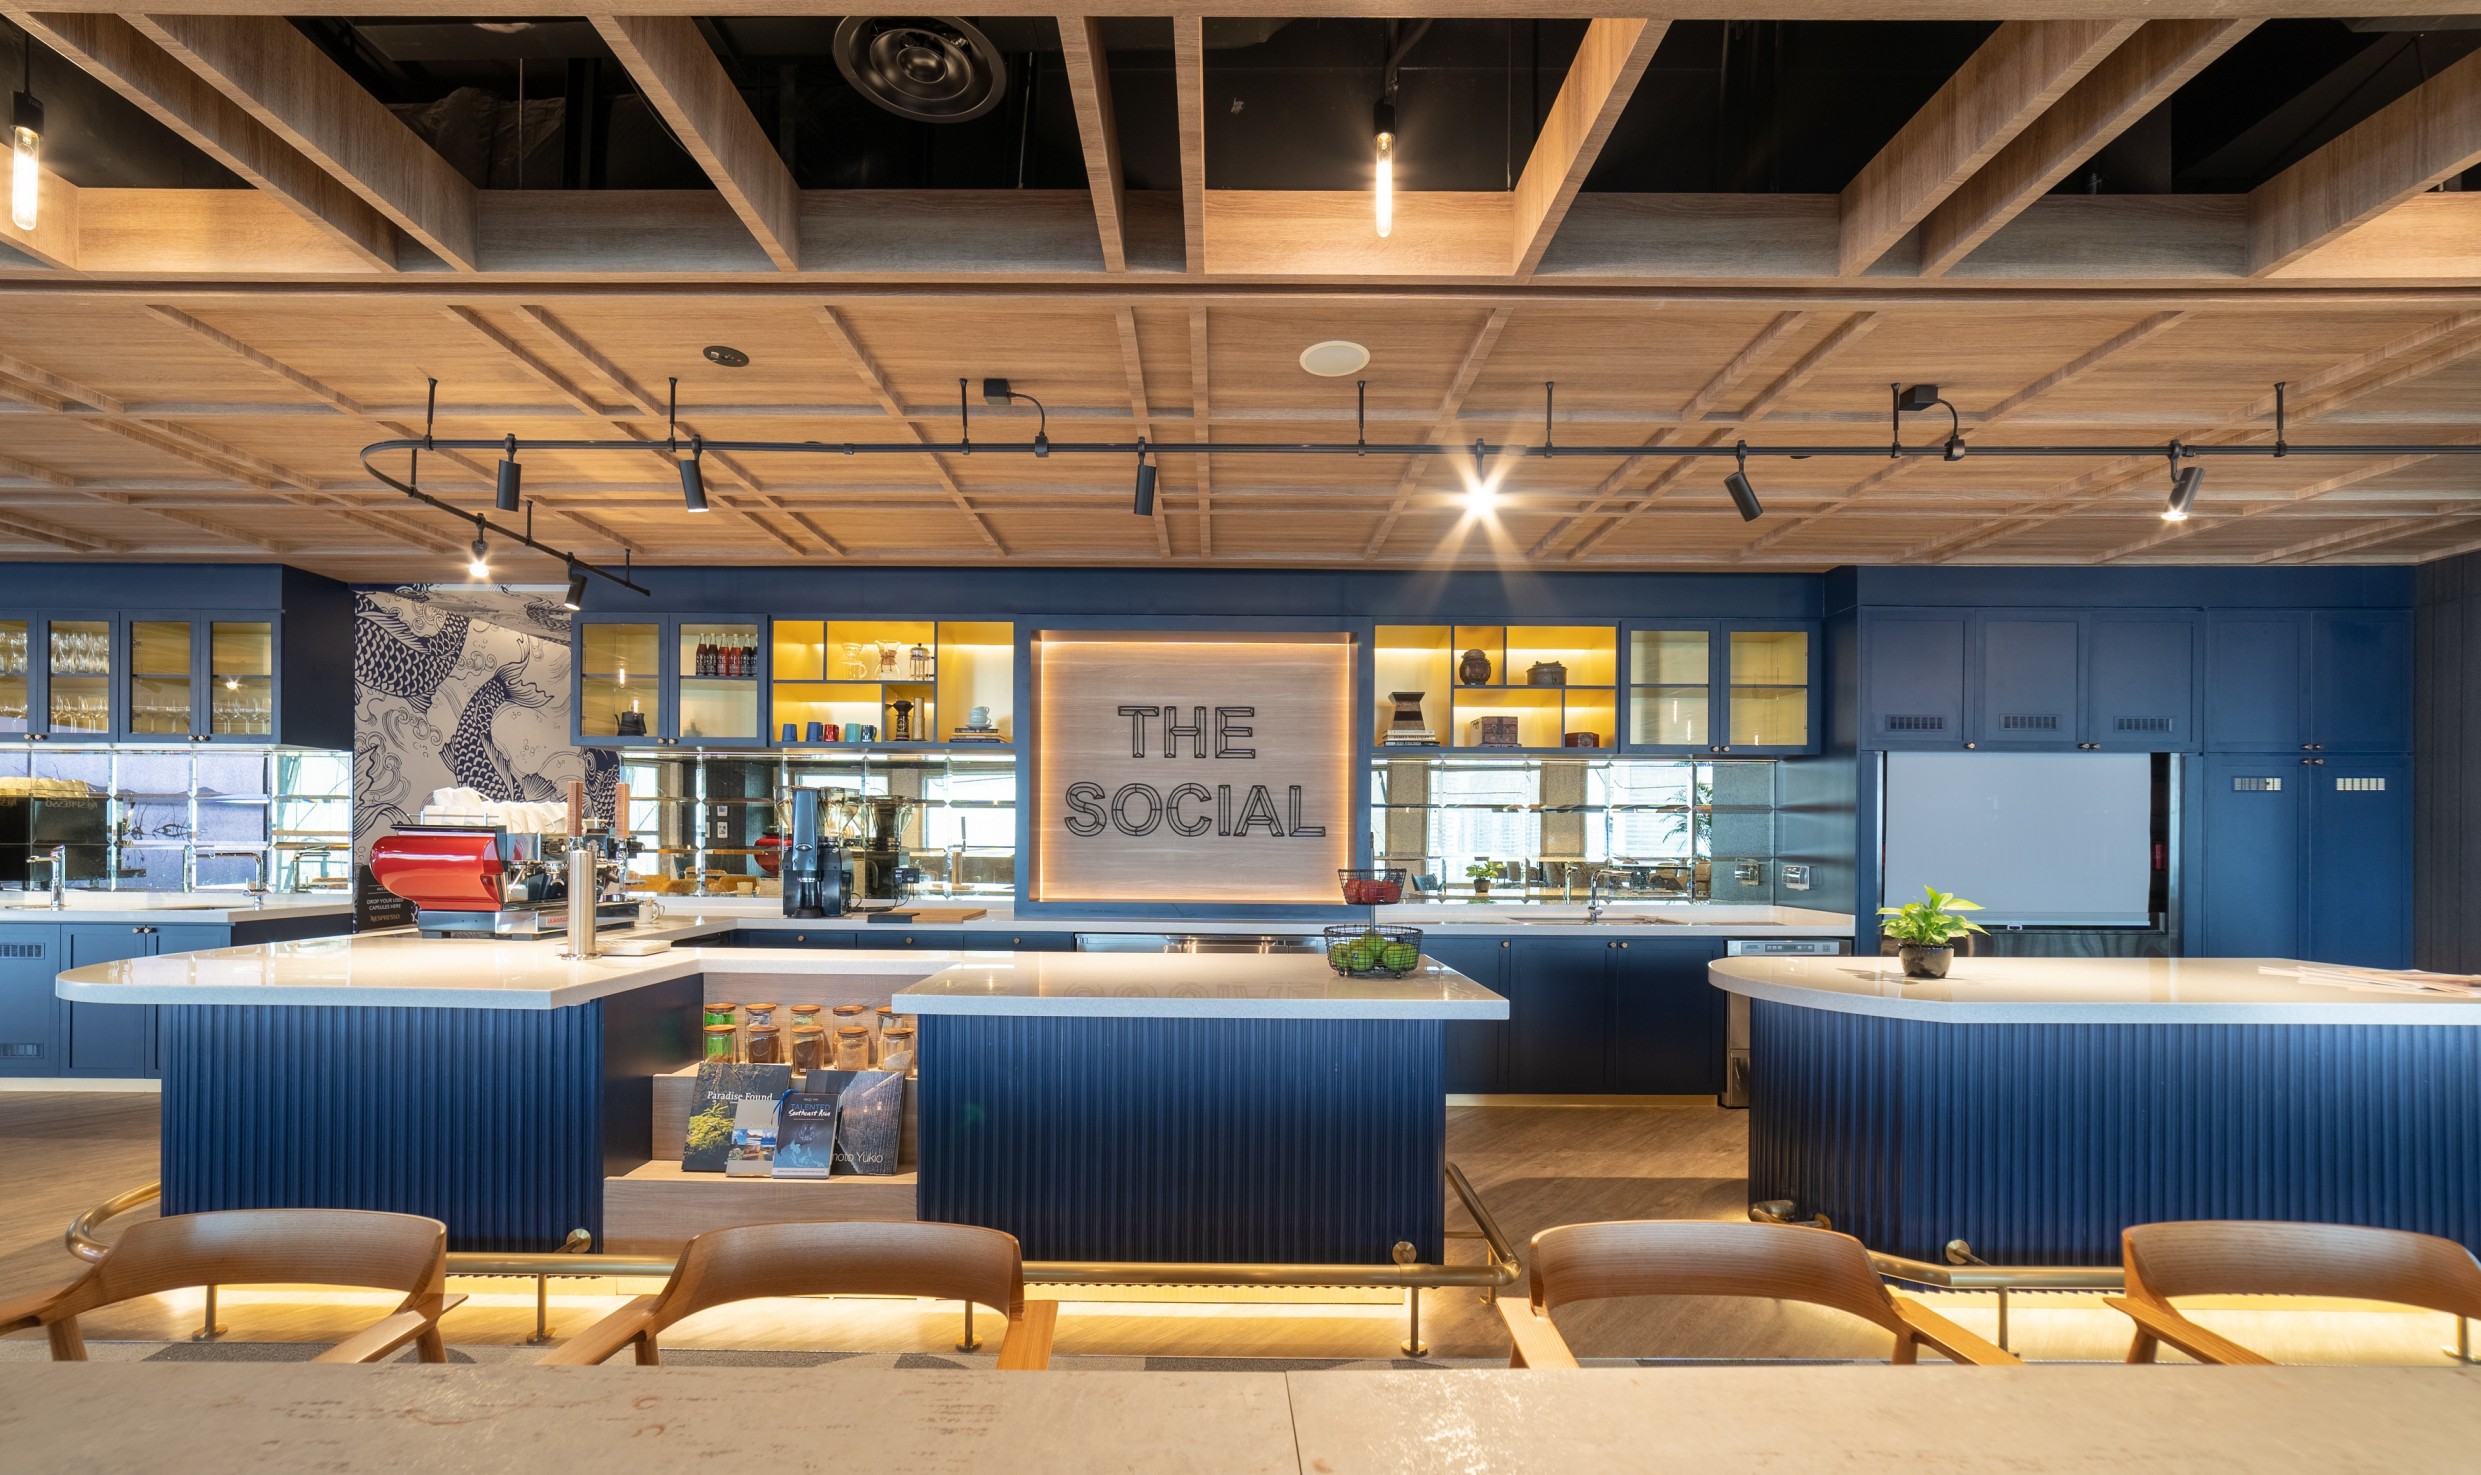 Hilton’s workplace design, which was inspired by hospitality trends, nurtured a welcoming environment by catering to diverse needs and prompting people to stay longer